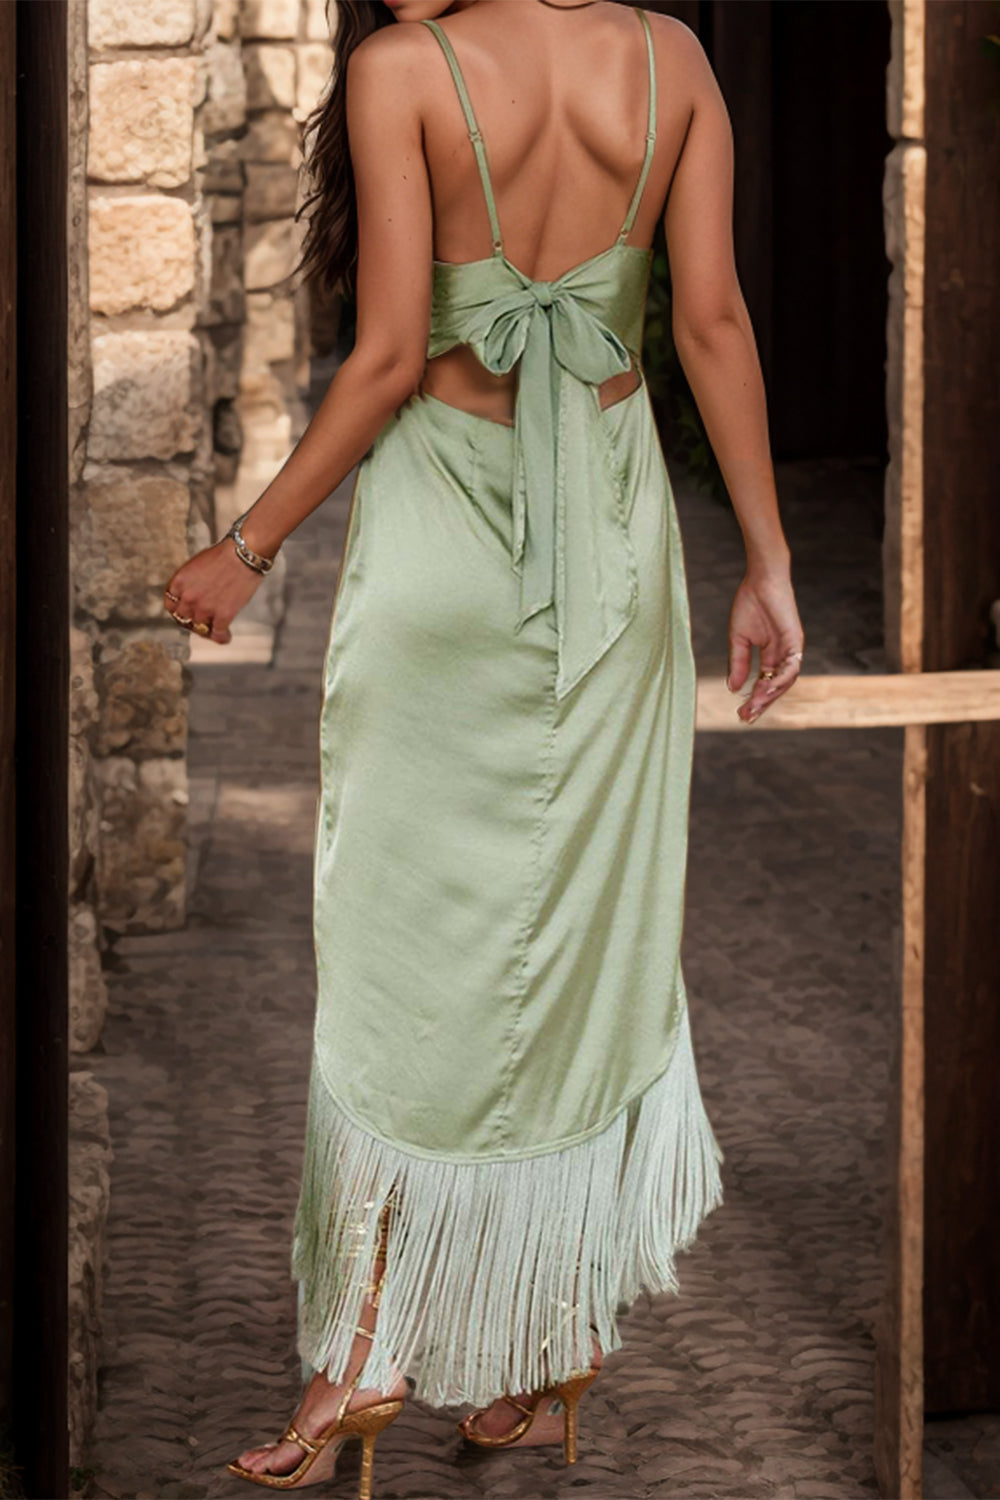 A model in a cami dress with a sleek bodice, adjustable straps, and an asymmetrical hemline enhanced by a fringe of tassels, paired with elegant strap sandals, exuding a playful yet sophisticated aura.